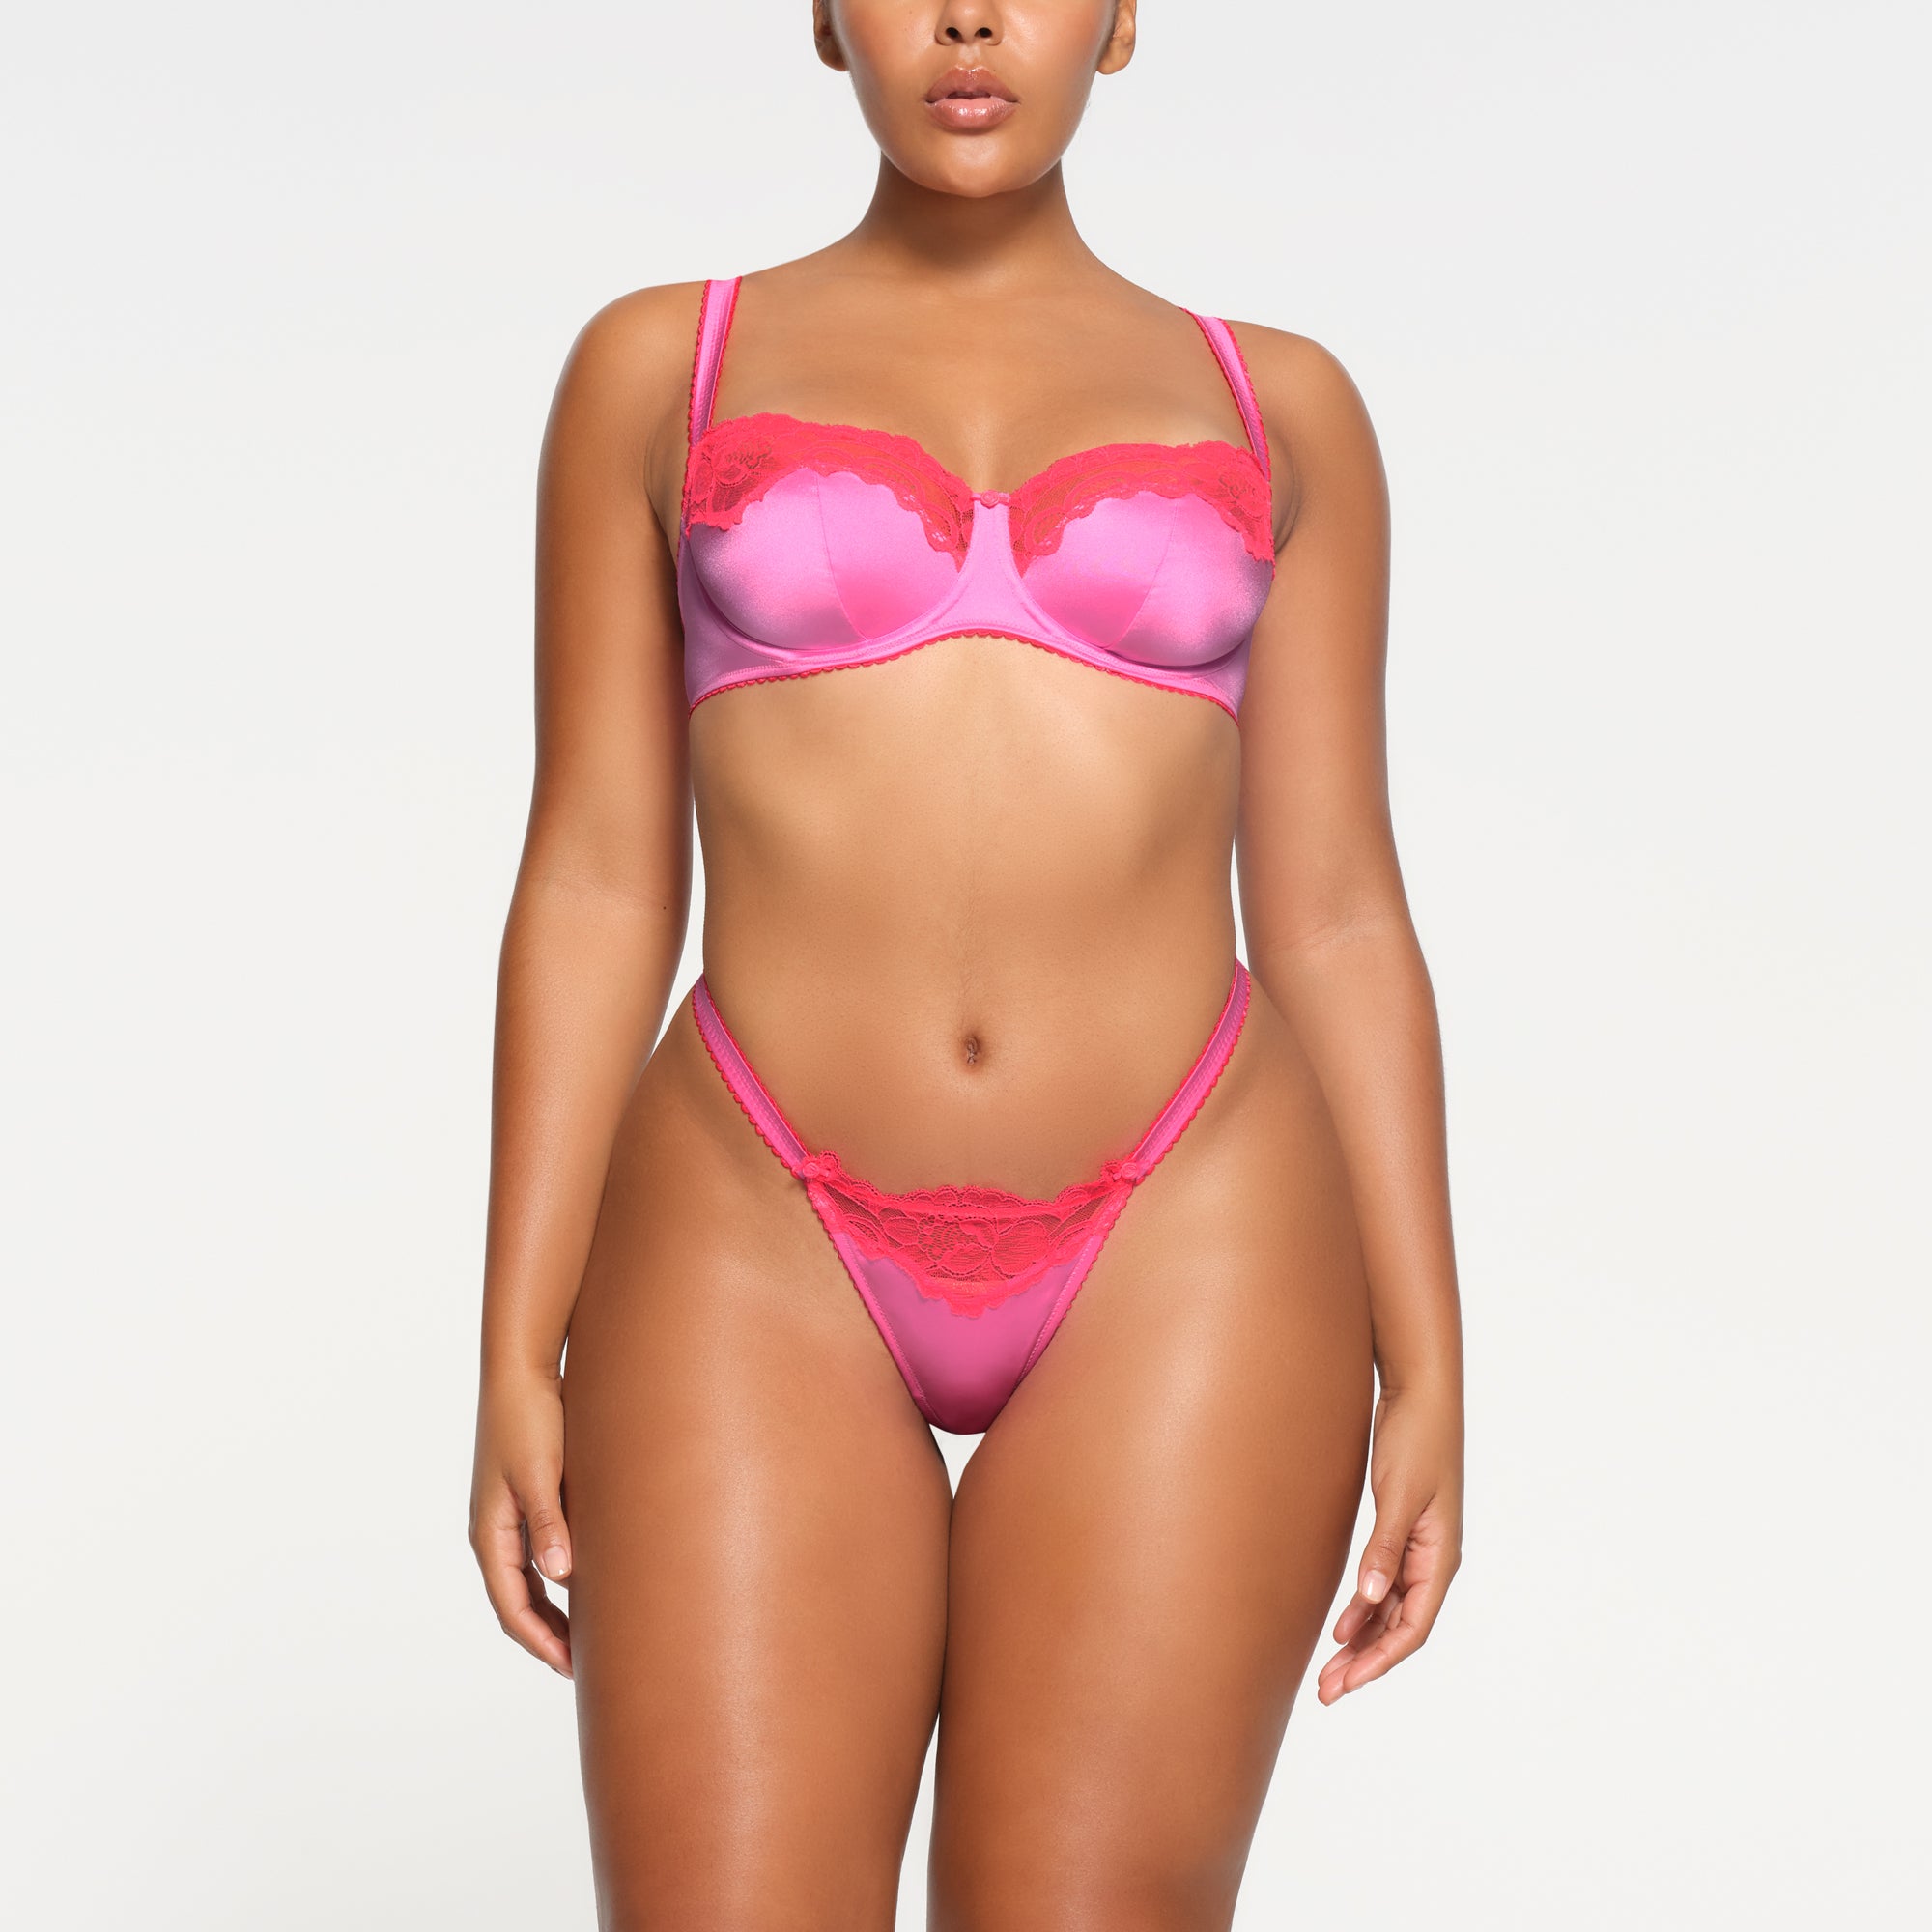 NWT~ SKIMS Kim K Thong / Color: Neon Orchid/ Size 3XL/ Style: (PN